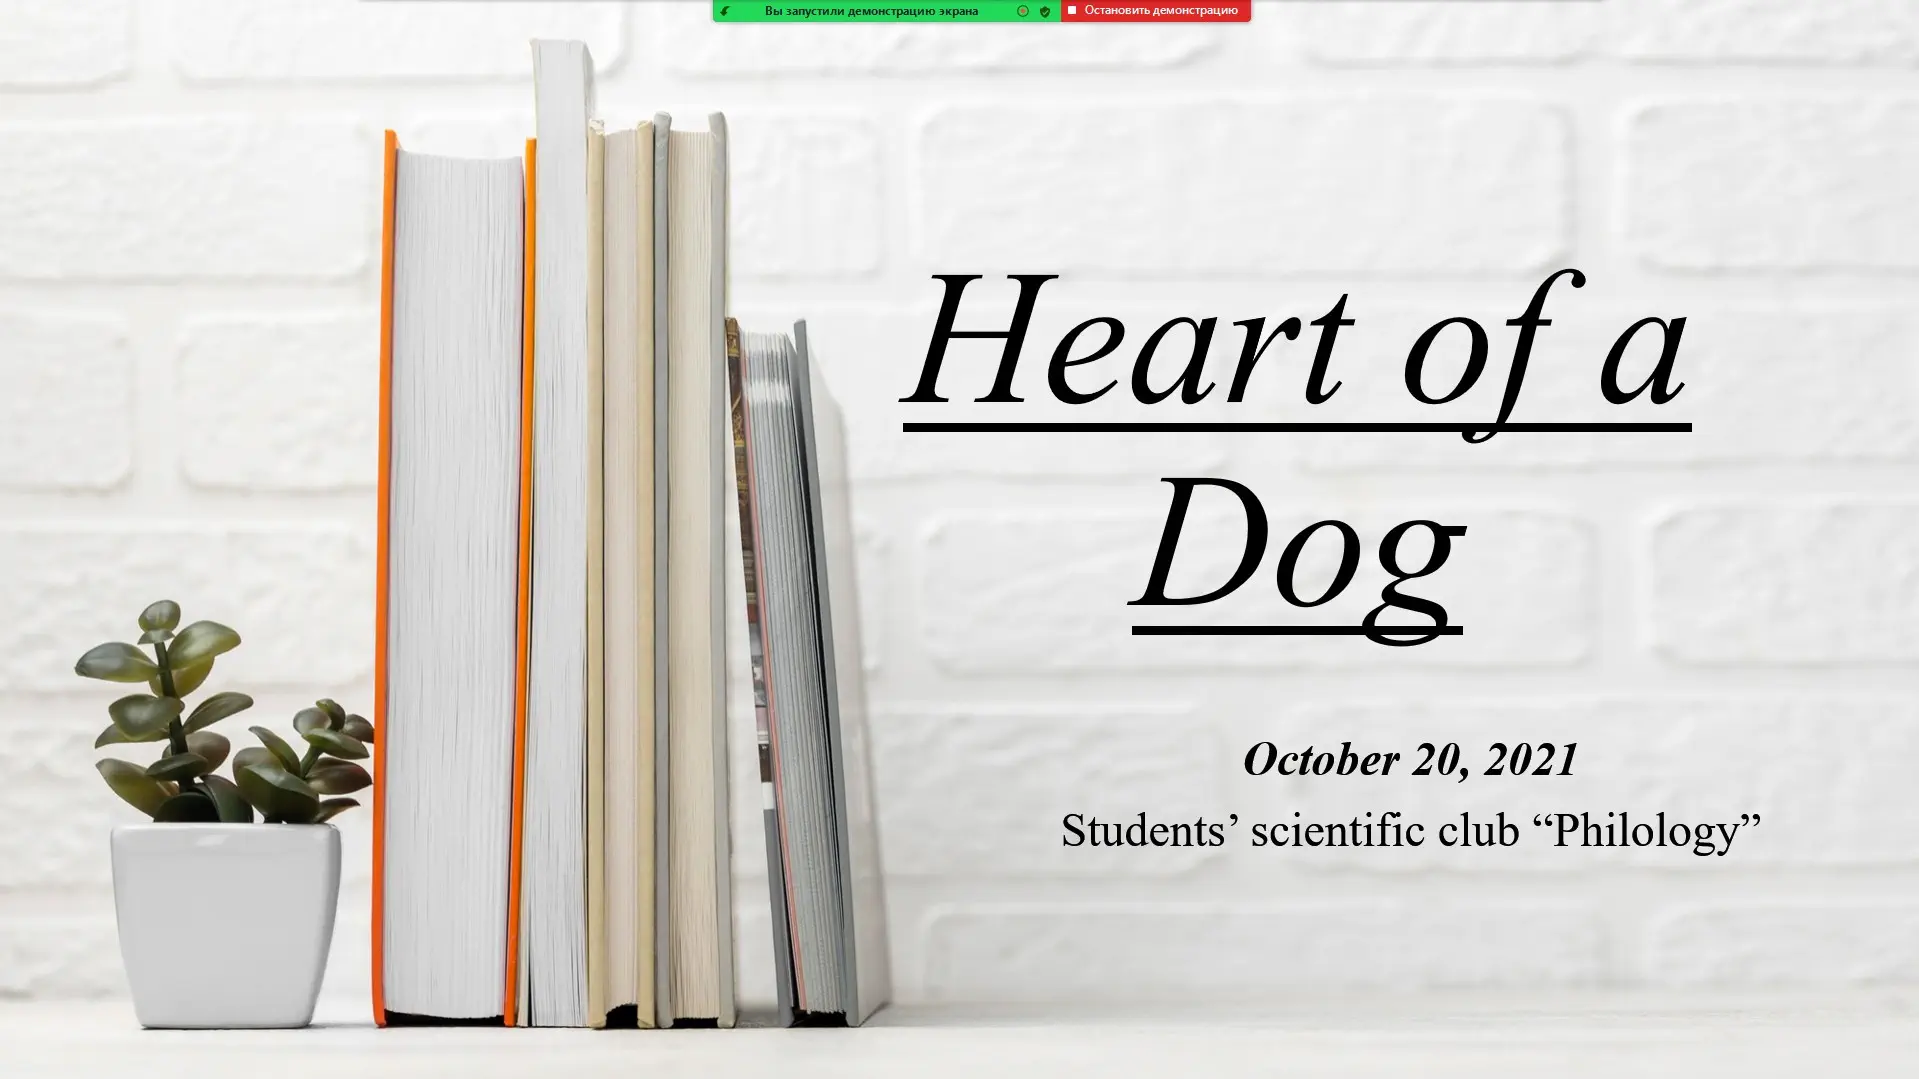 Members of the scientific club studied Mikhail Bulgakov’s satirical novella “Heart of a Dog” and its foreign translations